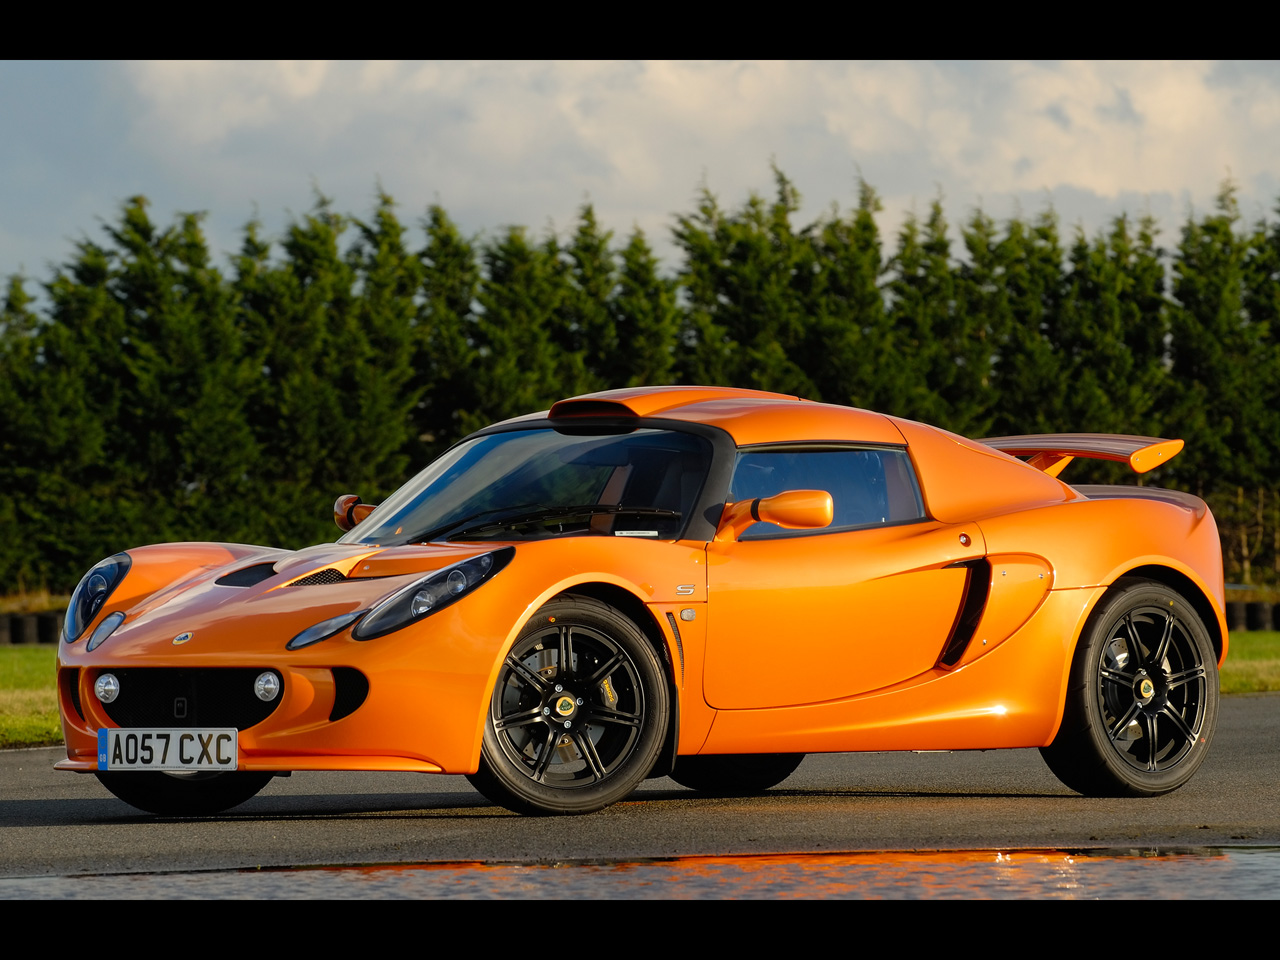 2008 Lotus Exige S Pictures | RSportsCars.